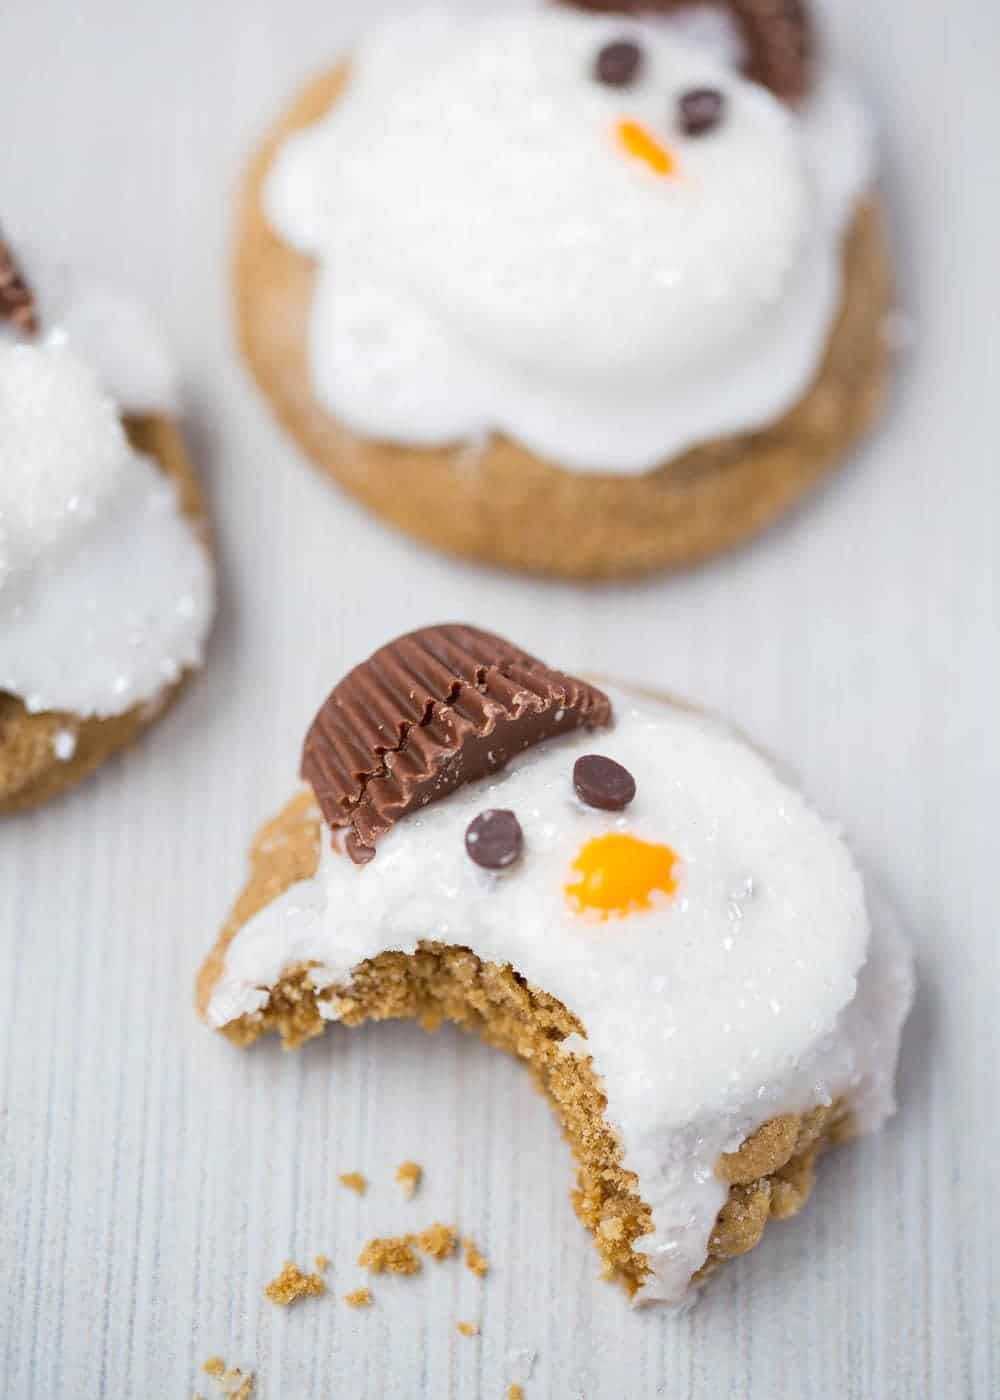 Snowman cookies with a bite taken out.